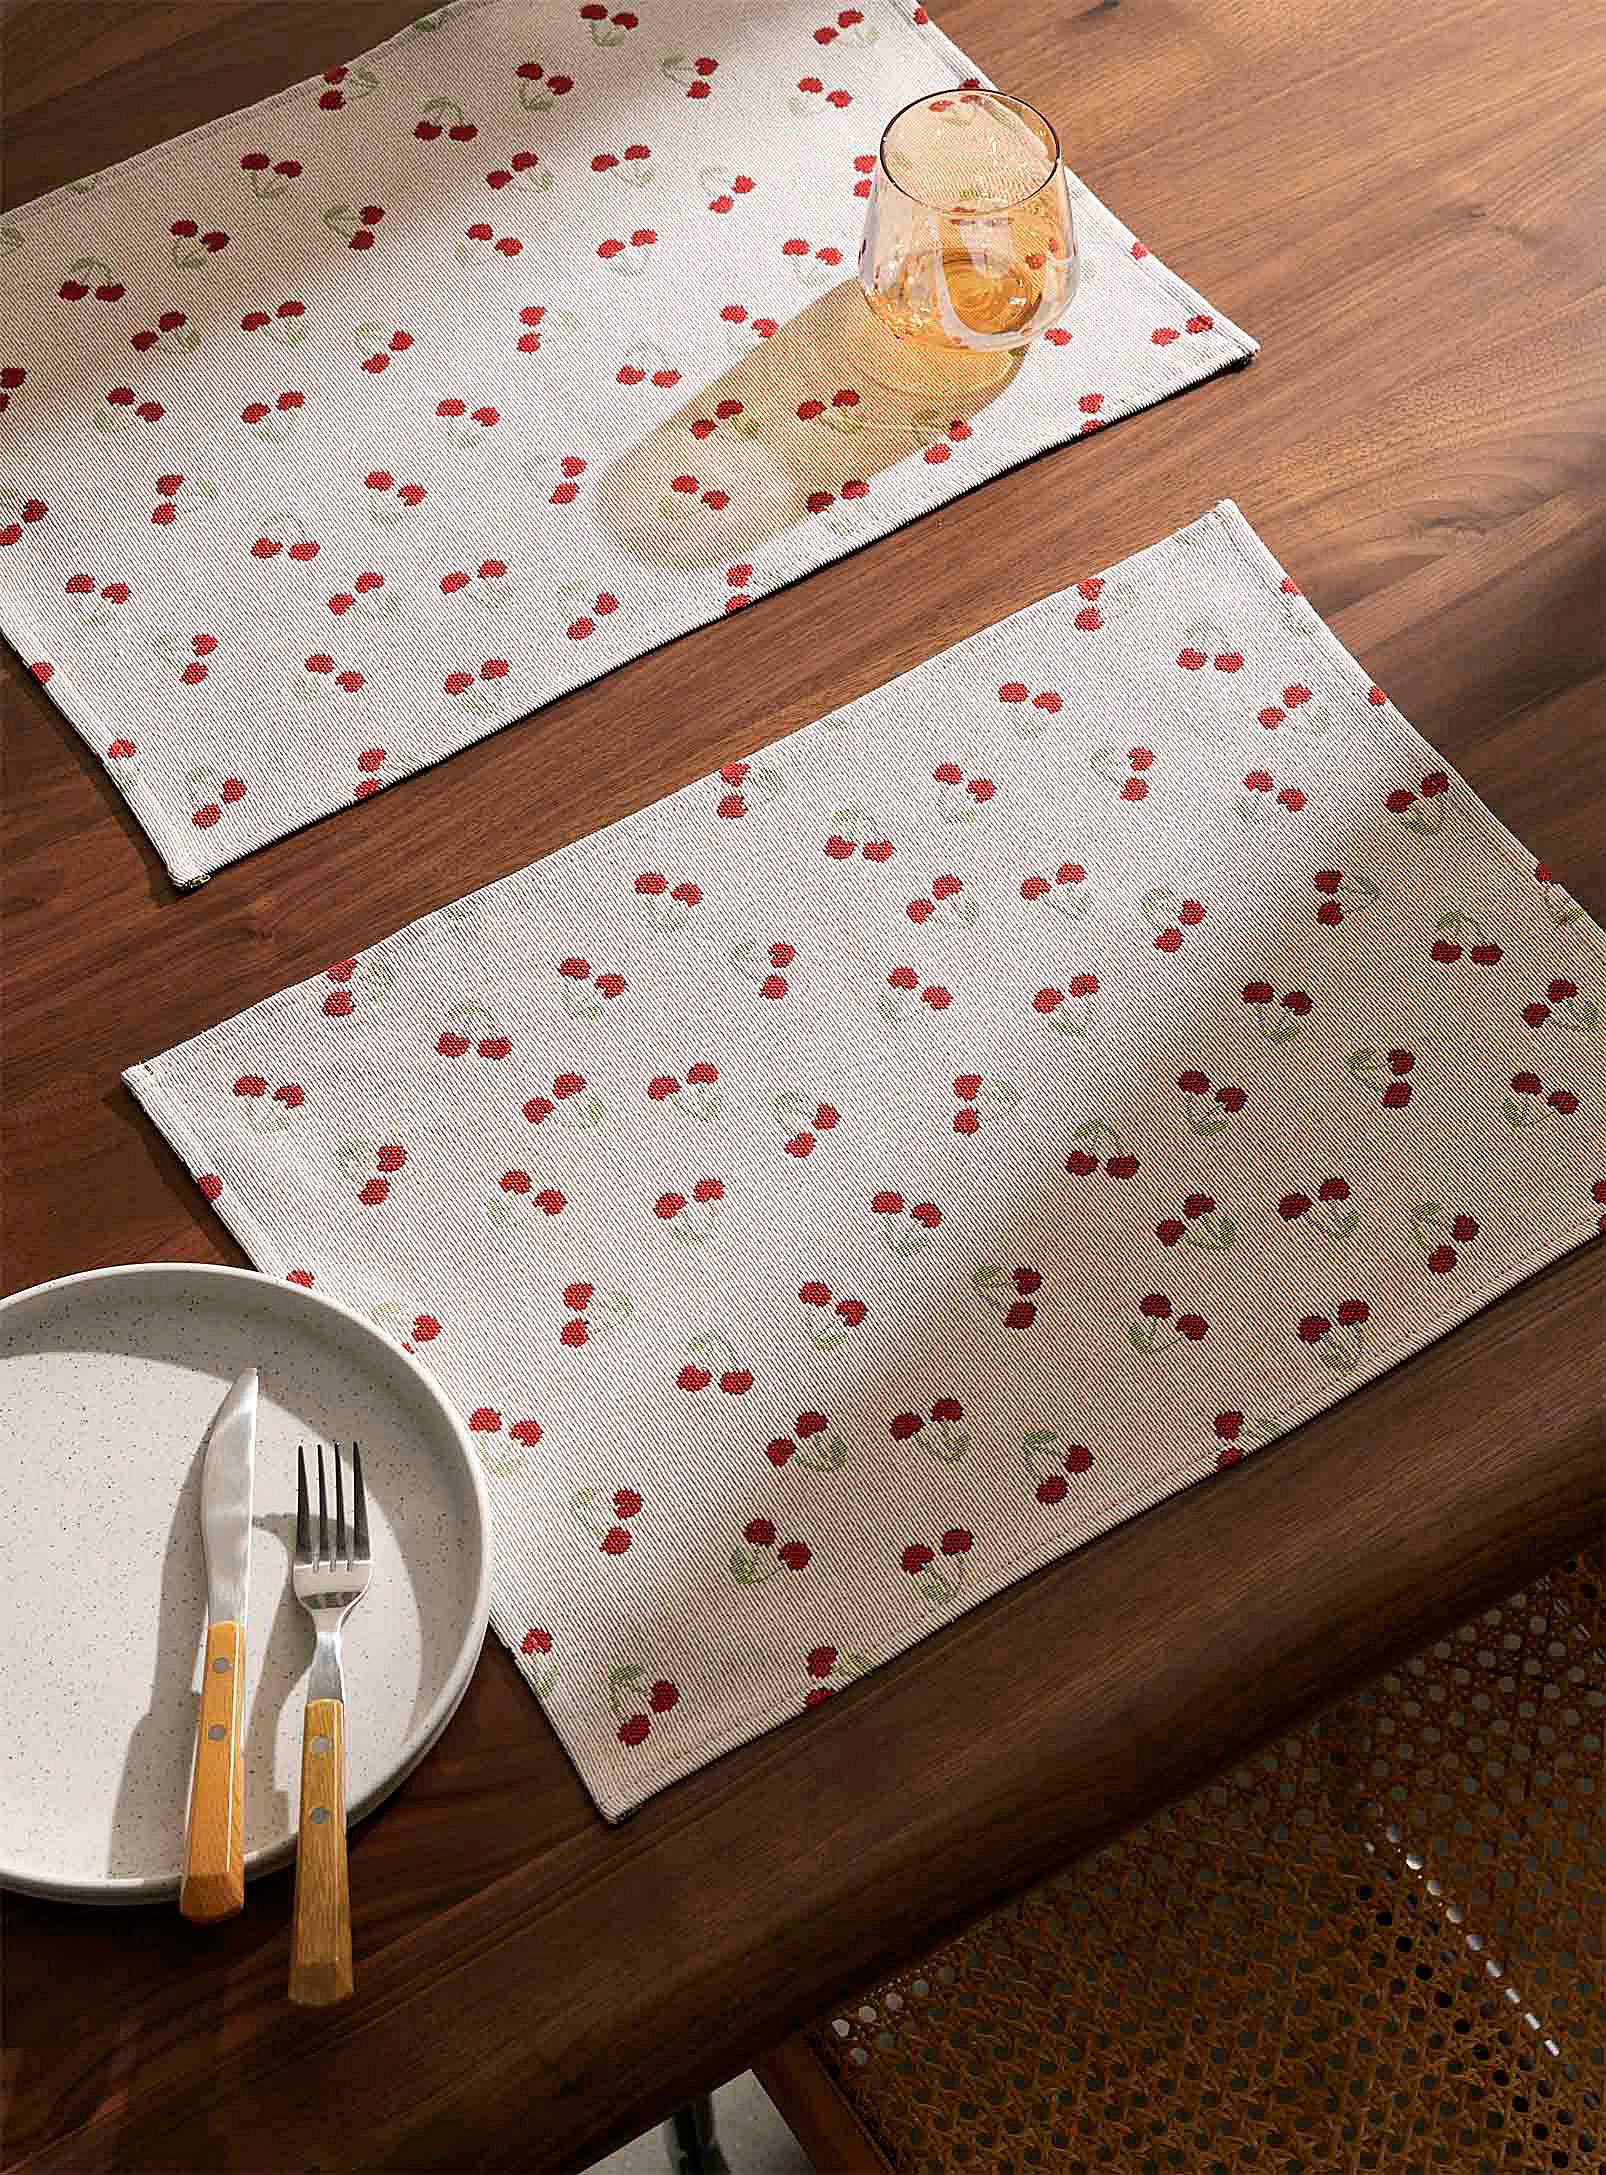 Simons Maison Retro Cherries Tapestry Placemats Set Of 2 In Patterned Ecru